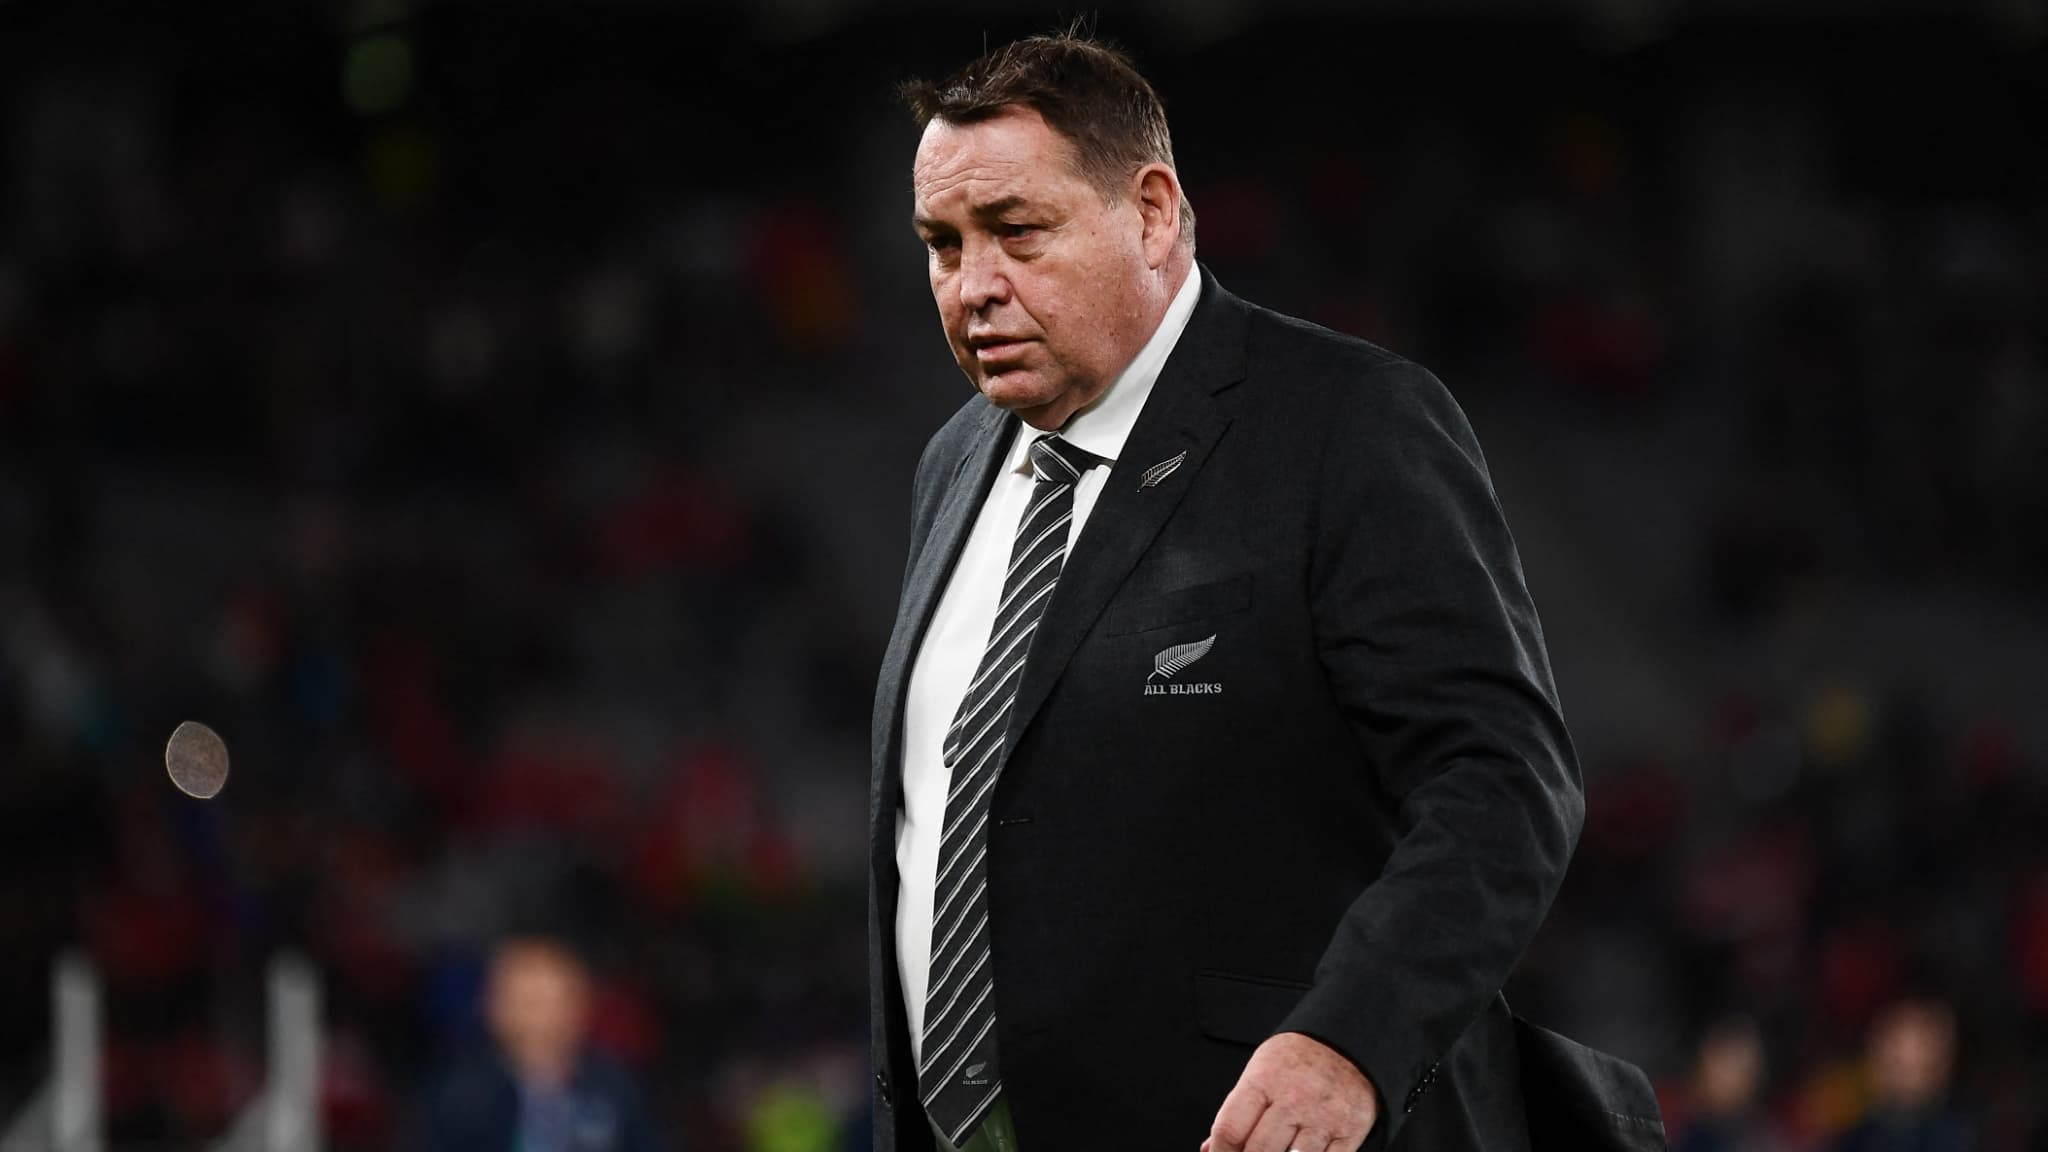 The former All Blacks coach has “rarely heard as much noise” as he did at the Stade de France